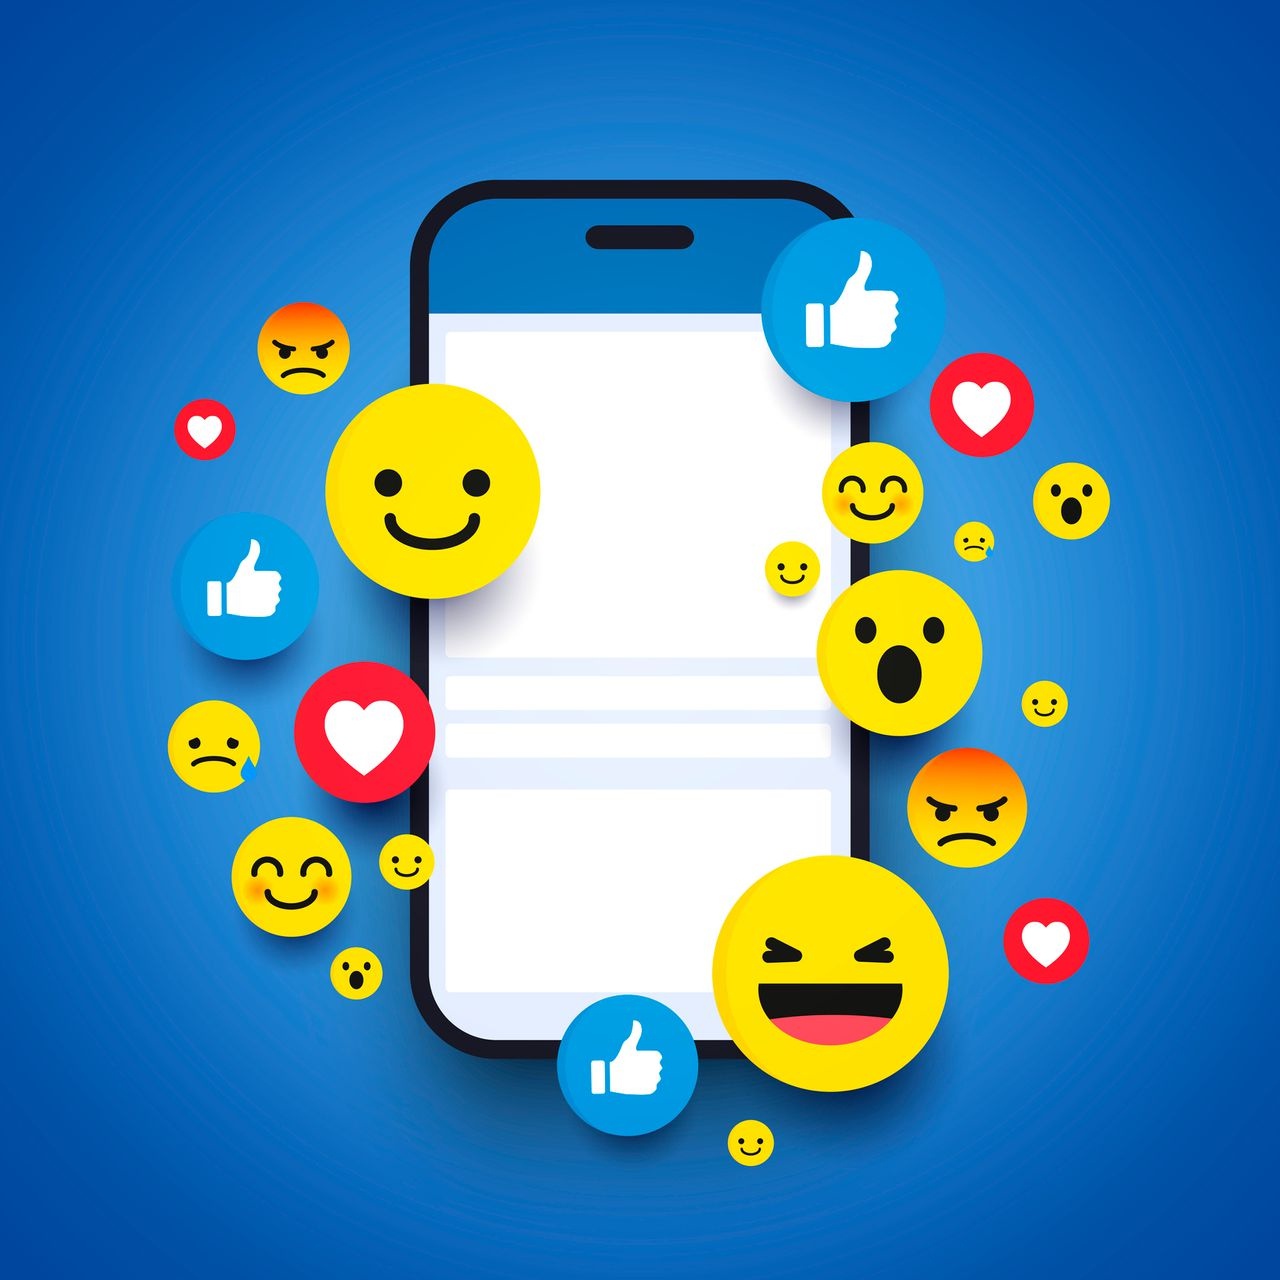 Is there a case for more medical emoji? Study looks at how clinicians use them on the job